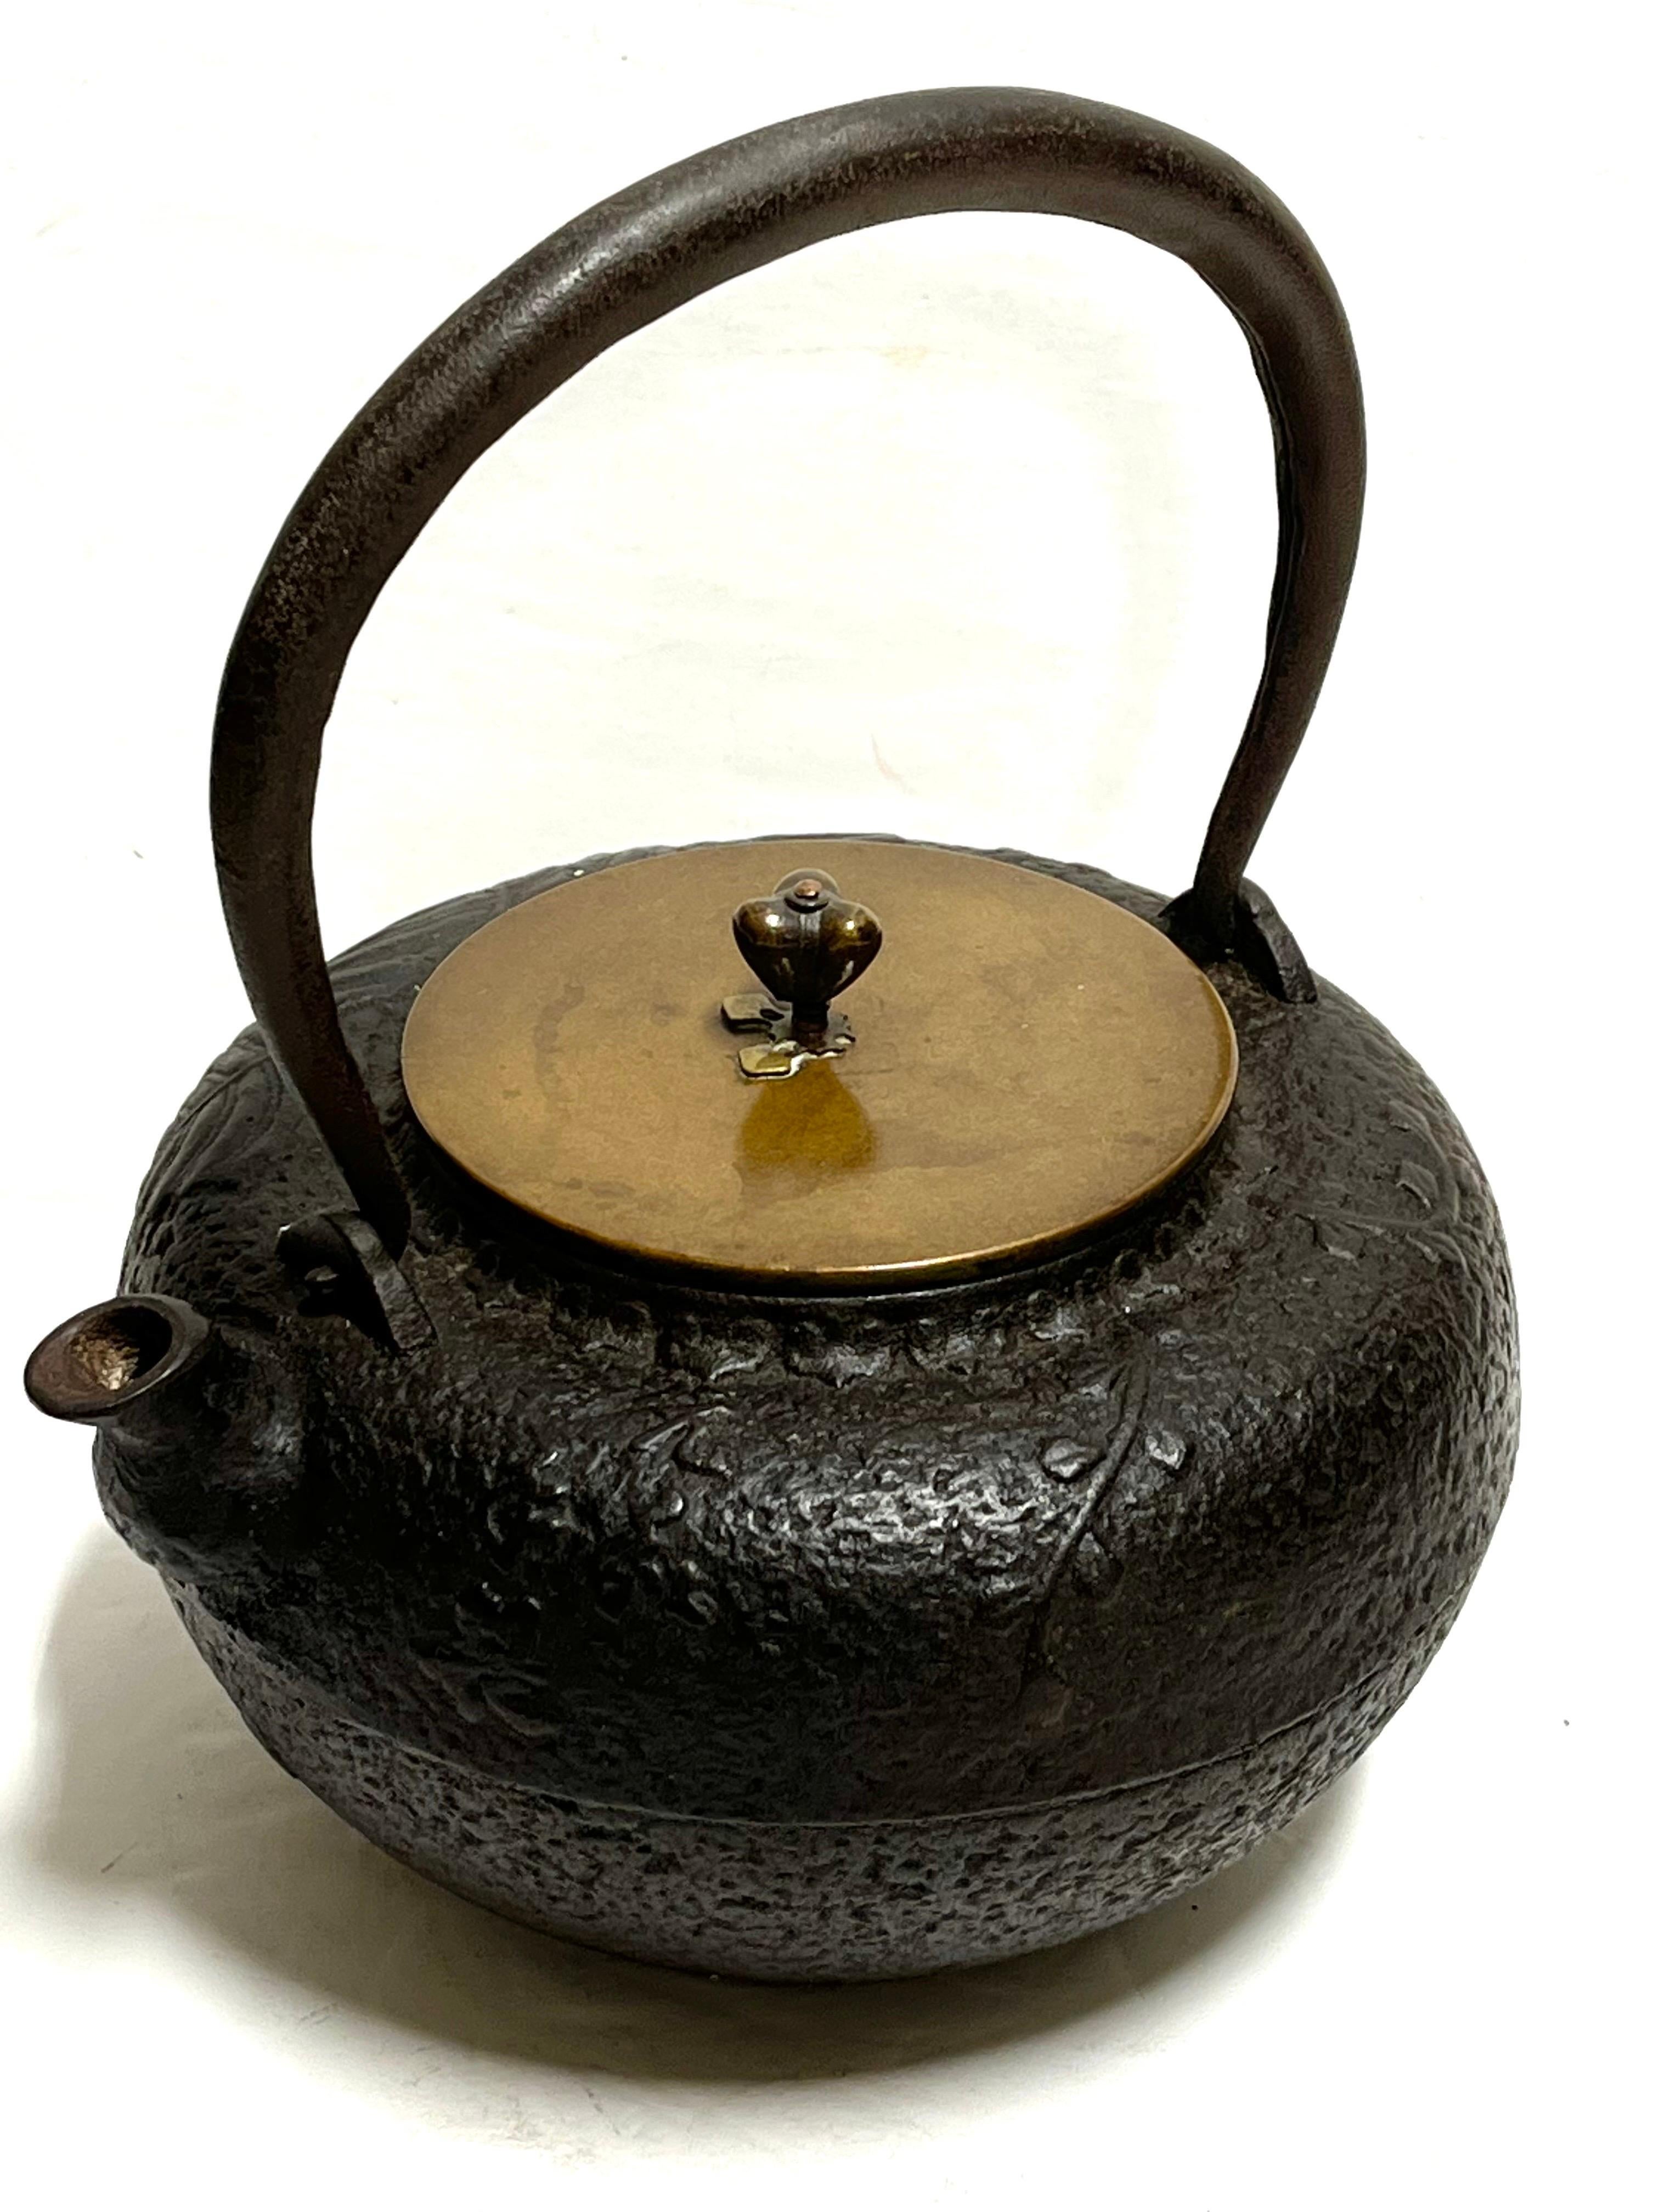 An antique Asian, probably Japanese in origin, cast iron and bronze Tetsubin. This piece has a bronze lid with an inscription. The outside of the cast iron teapot has a design. This type of object was used to heat and pour water for tea. Some